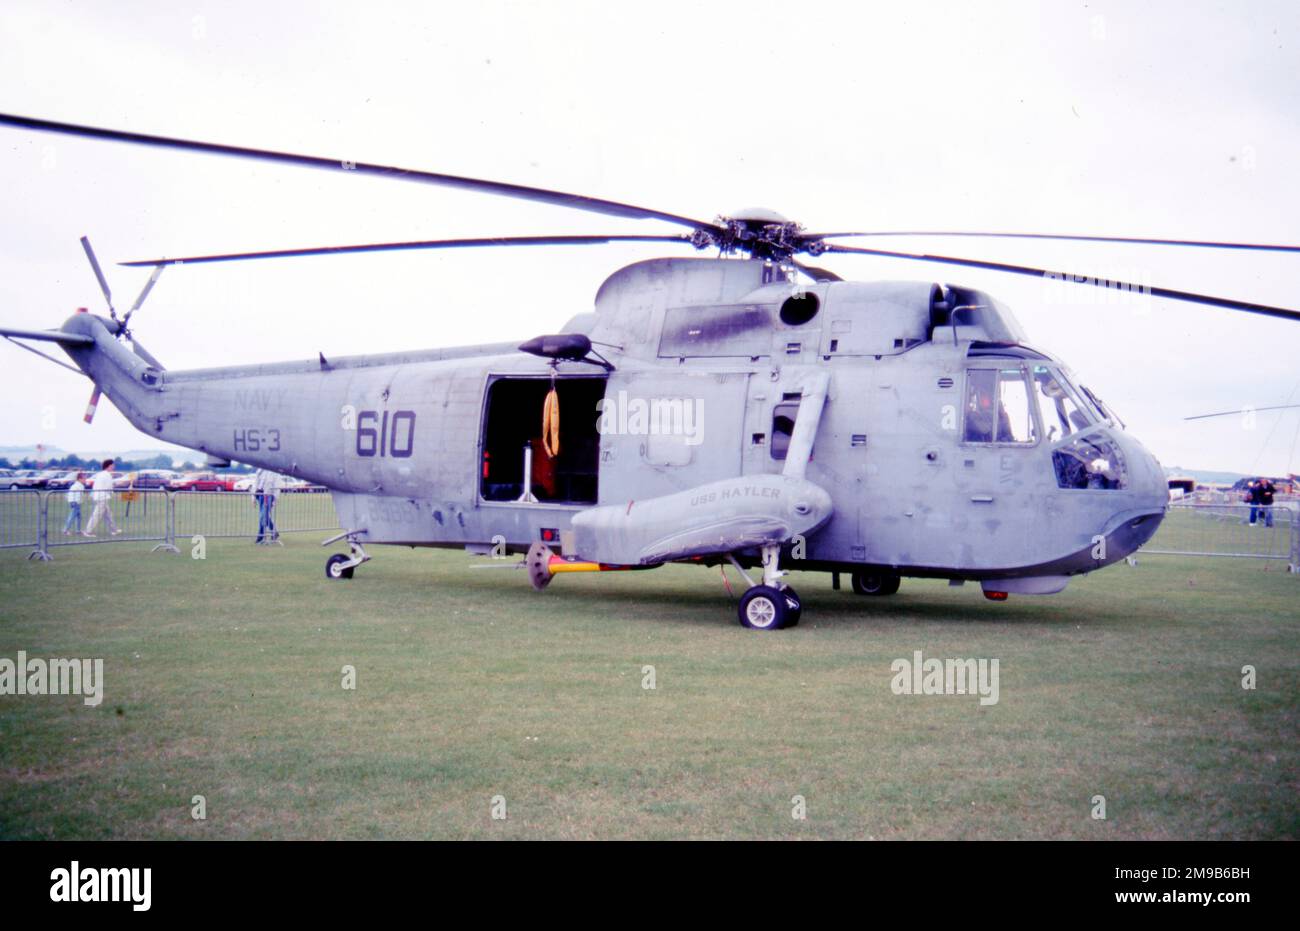 United States Navy (USN) - Sikorsky SH-3H Sea King 148988 (msn 61-062, base code 'AA', call-sign '610'), of HS-3 embarked on USS Hayler, at Middle Wallop on 16 July 1988. Stock Photo